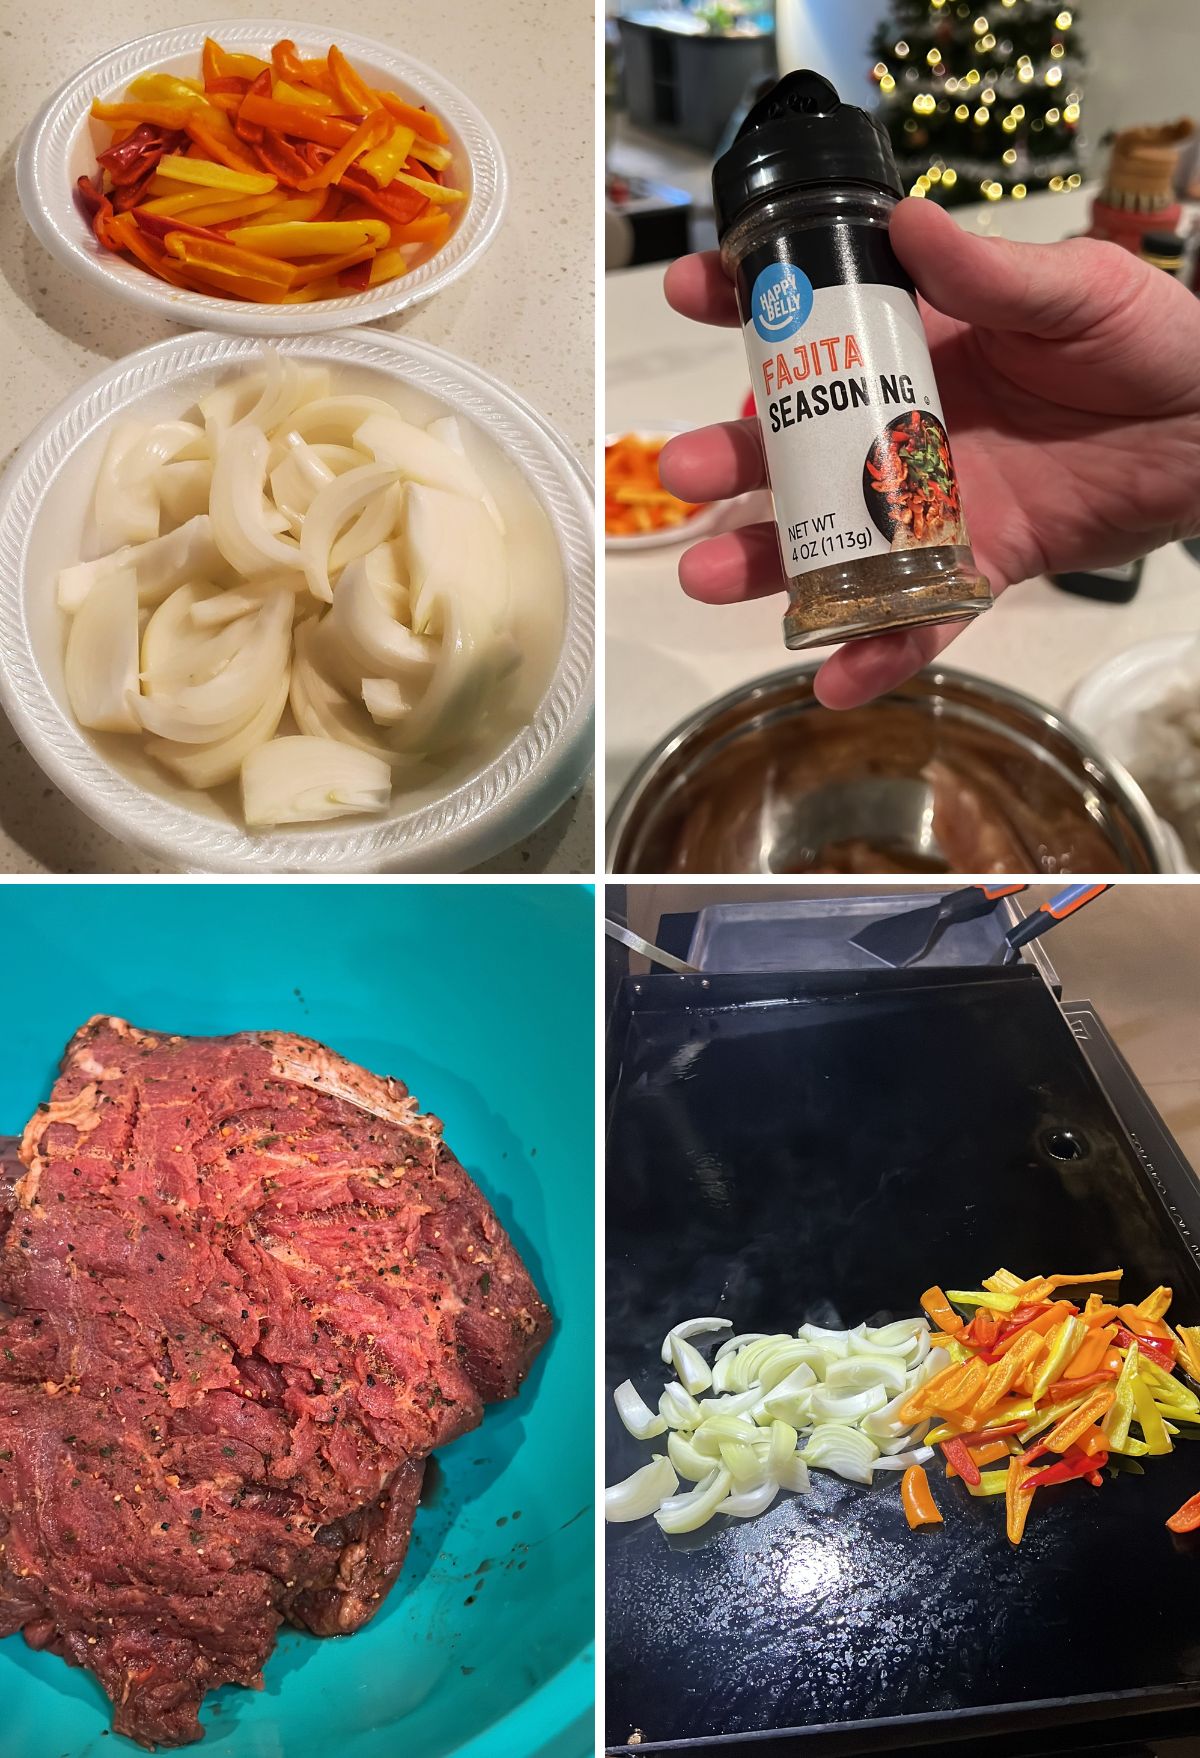 A collage of four images displaying cooking ingredients, including sliced onions and bell peppers, a bottle of fajita seasoning, and marinated meat on a plate.